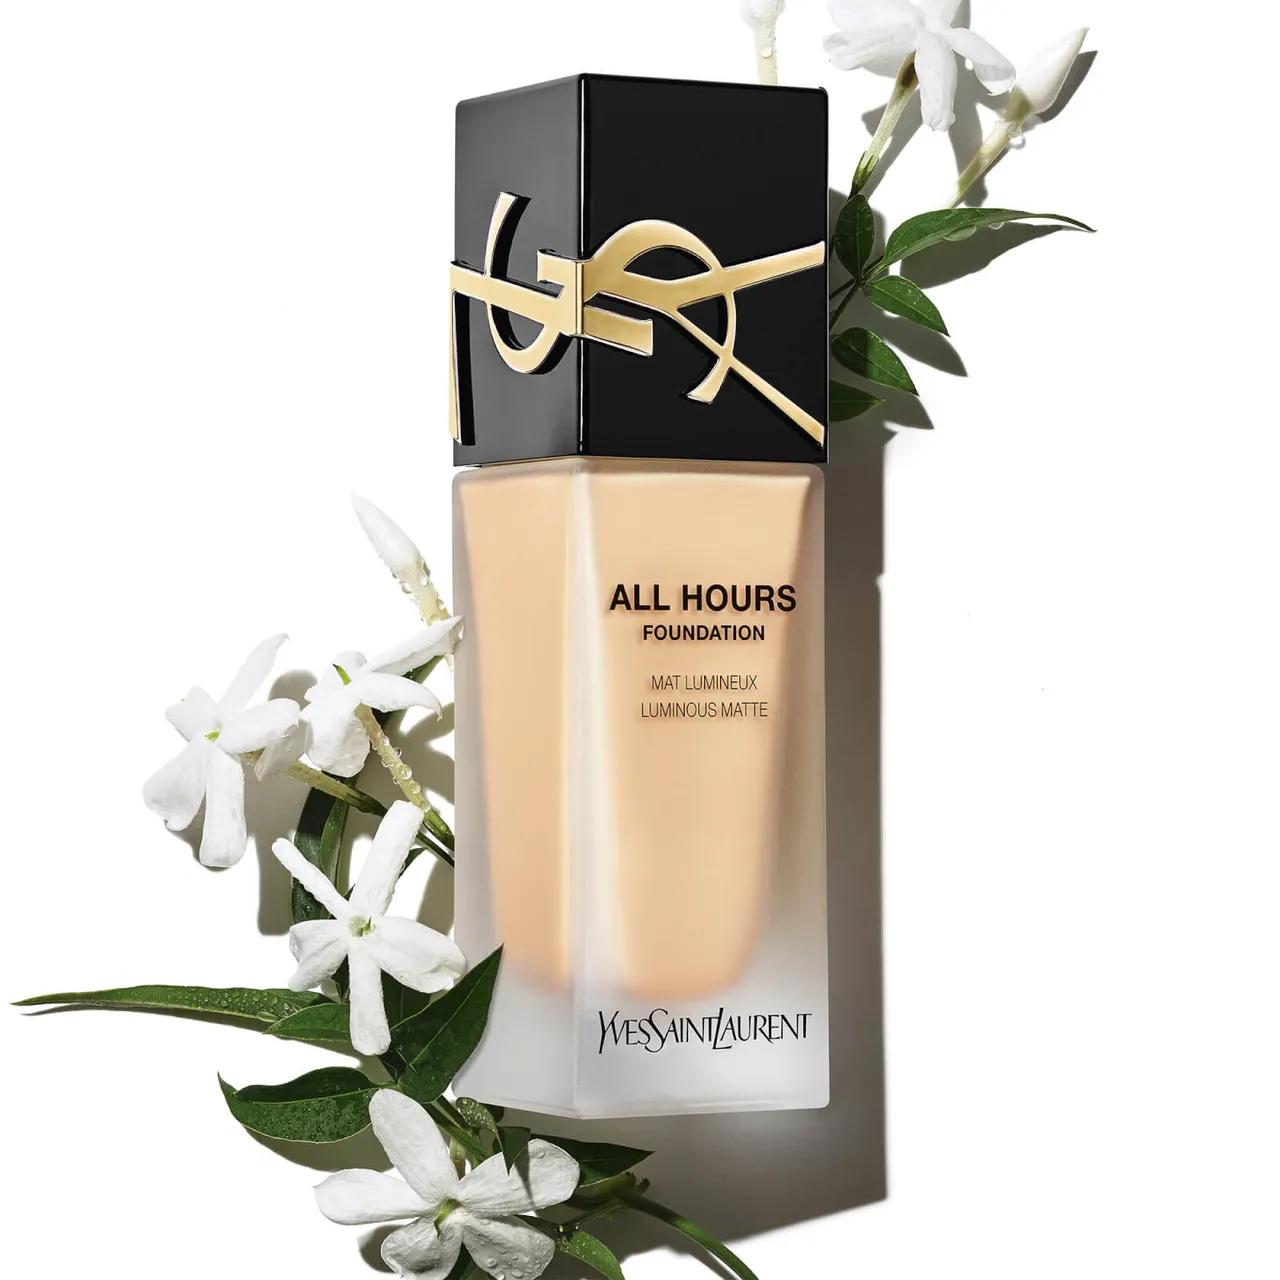 Yves Saint Laurent All Hours Luminous Matte Foundation with SPF 39 25ml (Various Shades) - DC7